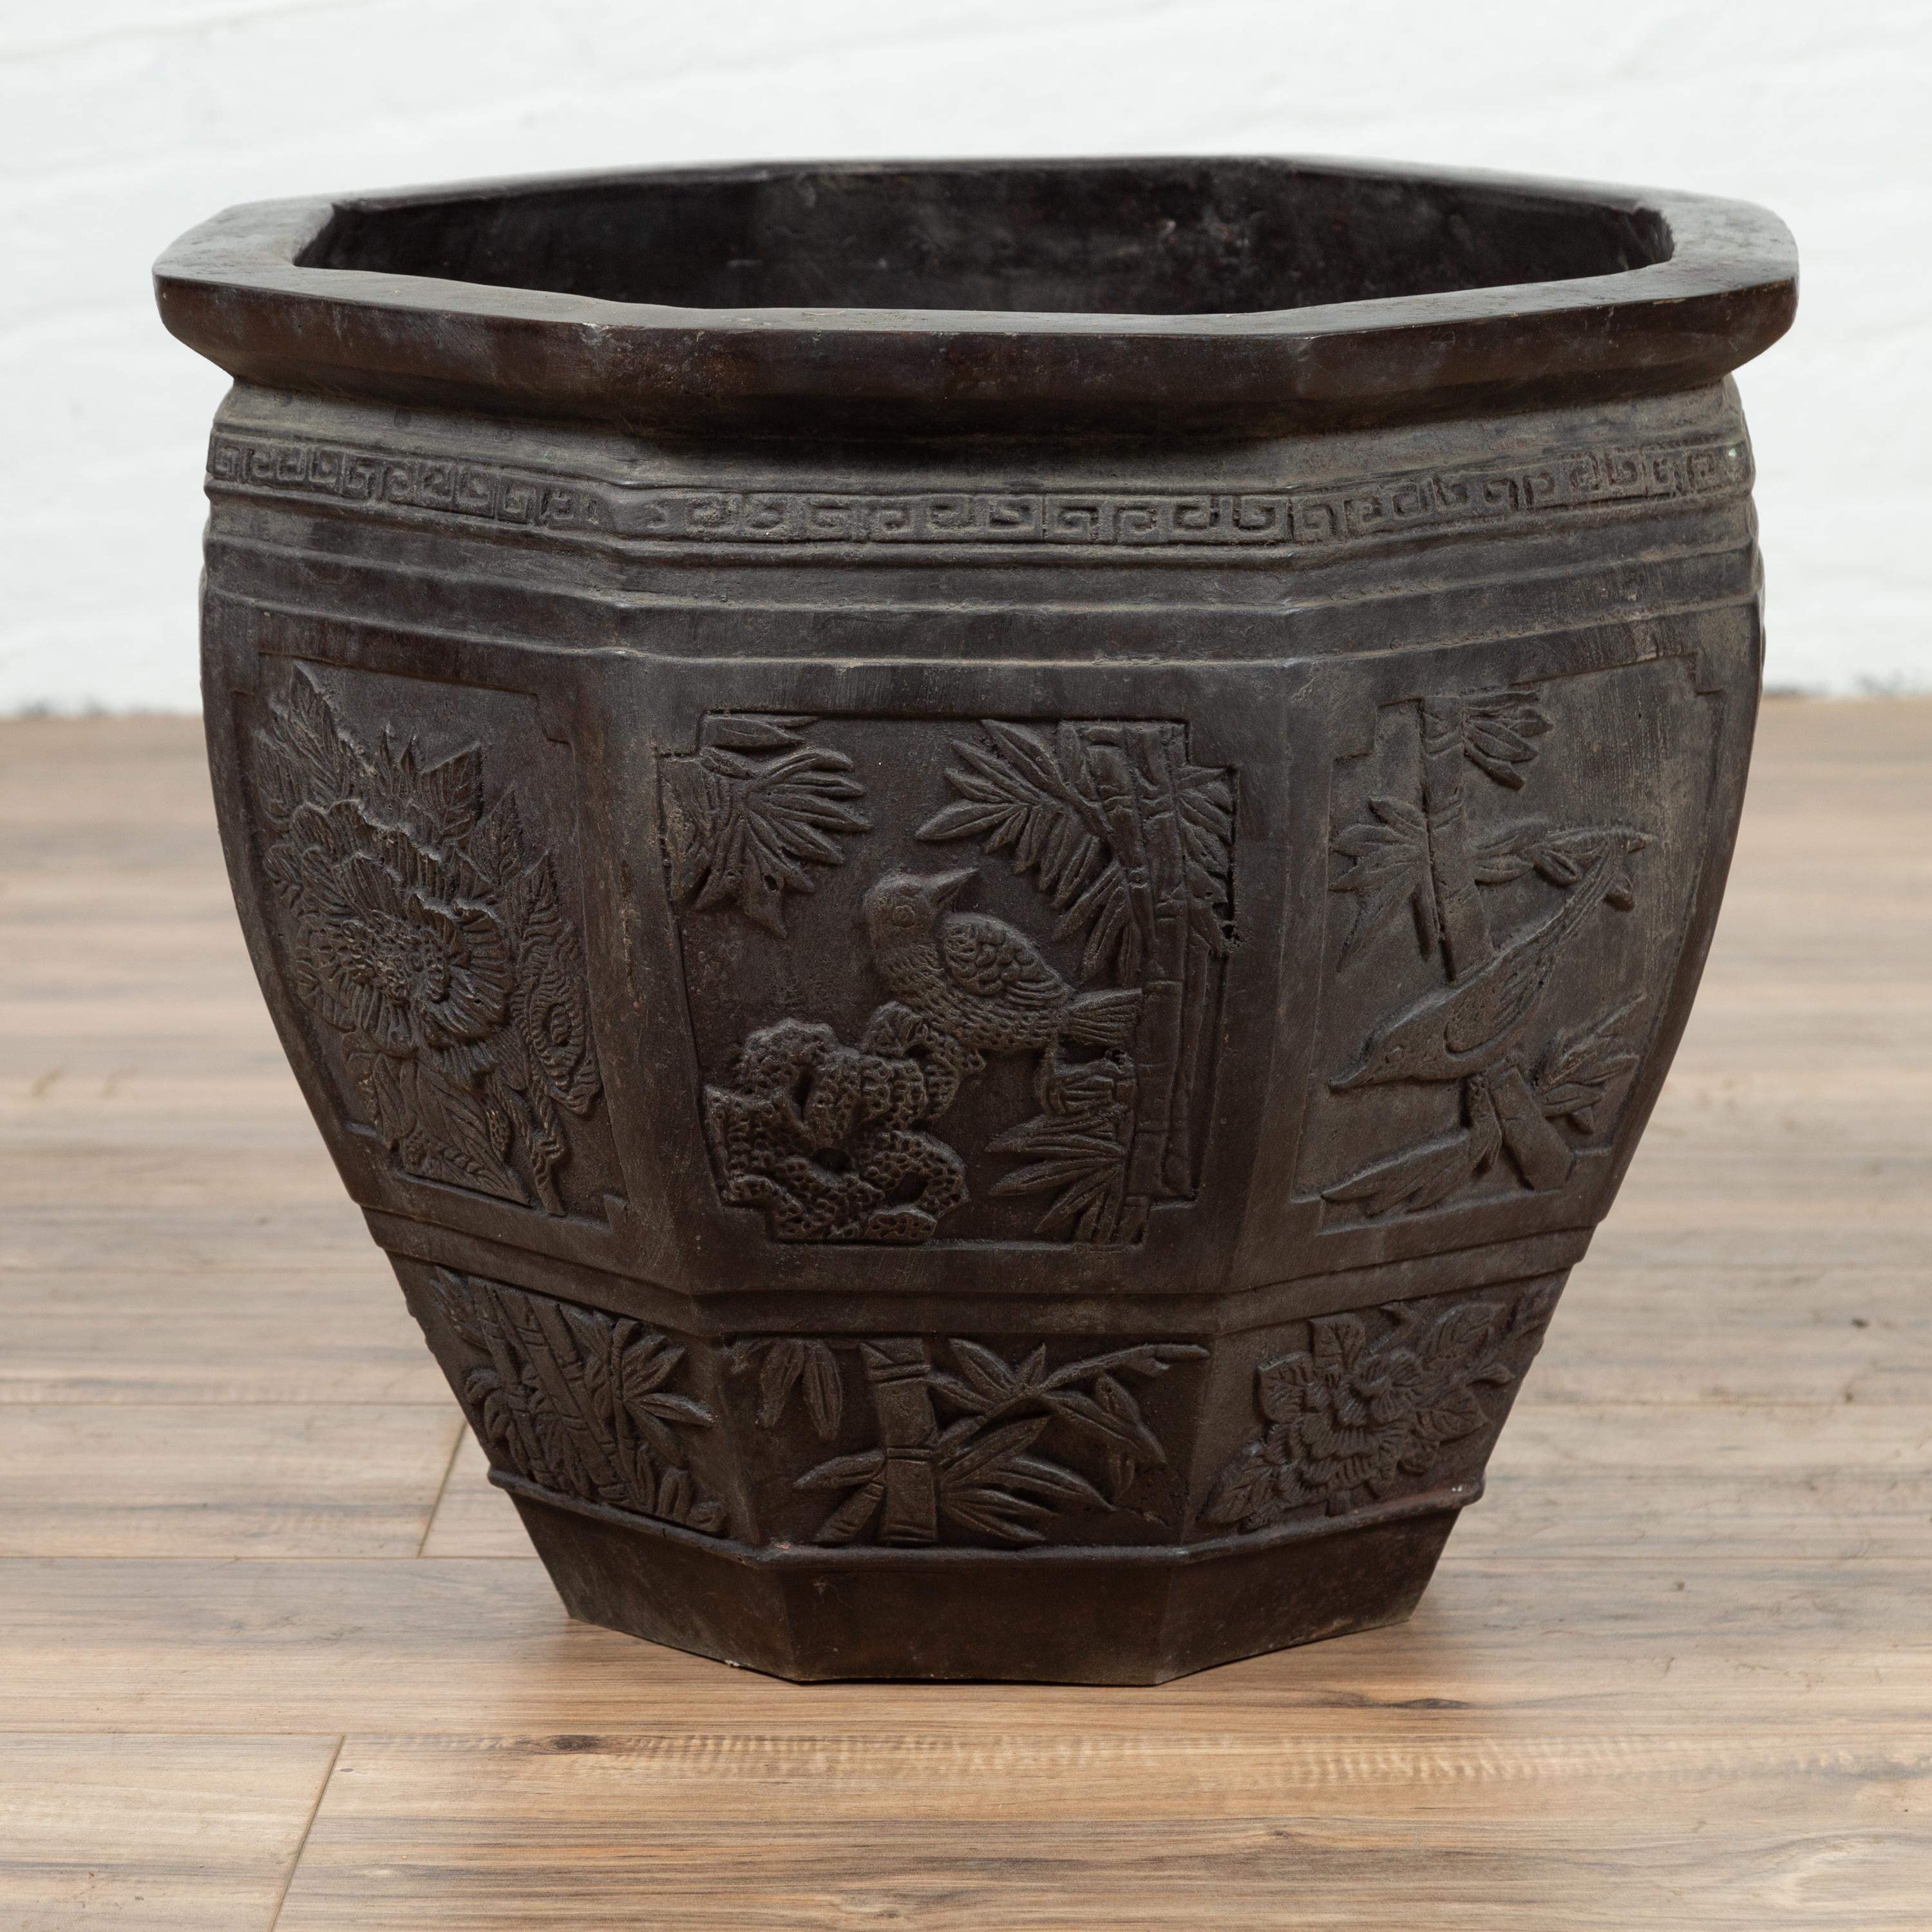 An Asian vintage bronze planter with floral and bird motifs. Presenting an octagonal shape and a dark patina, this handsome bronze planter features a beveled lip sitting above a tapering body, adorned in its upper section with a classical Meander.